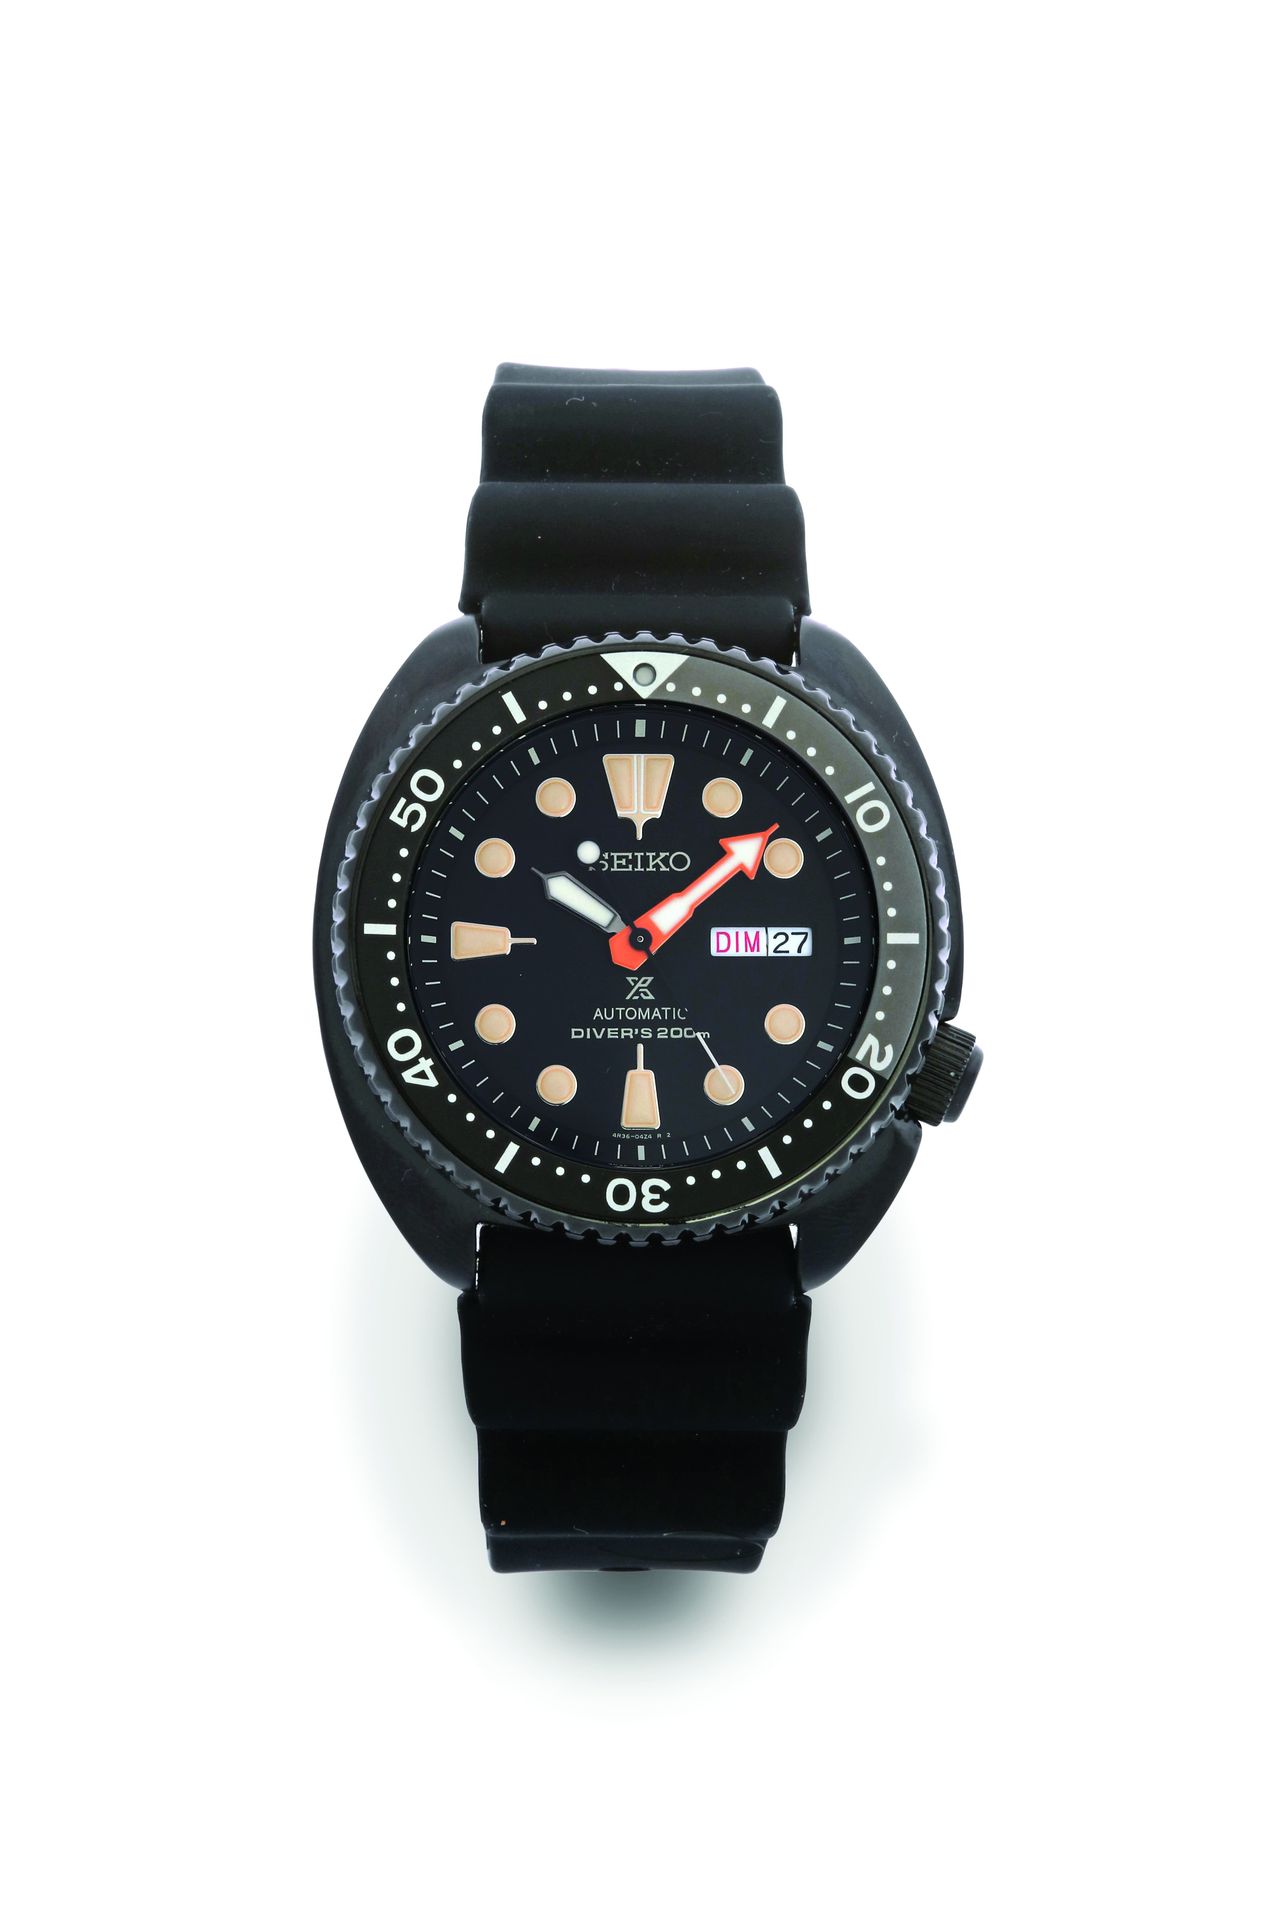 SEIKO Diver's 200 m Limited Edition
Reference 4R36 - 06L0
Diver's watch in black&hellip;